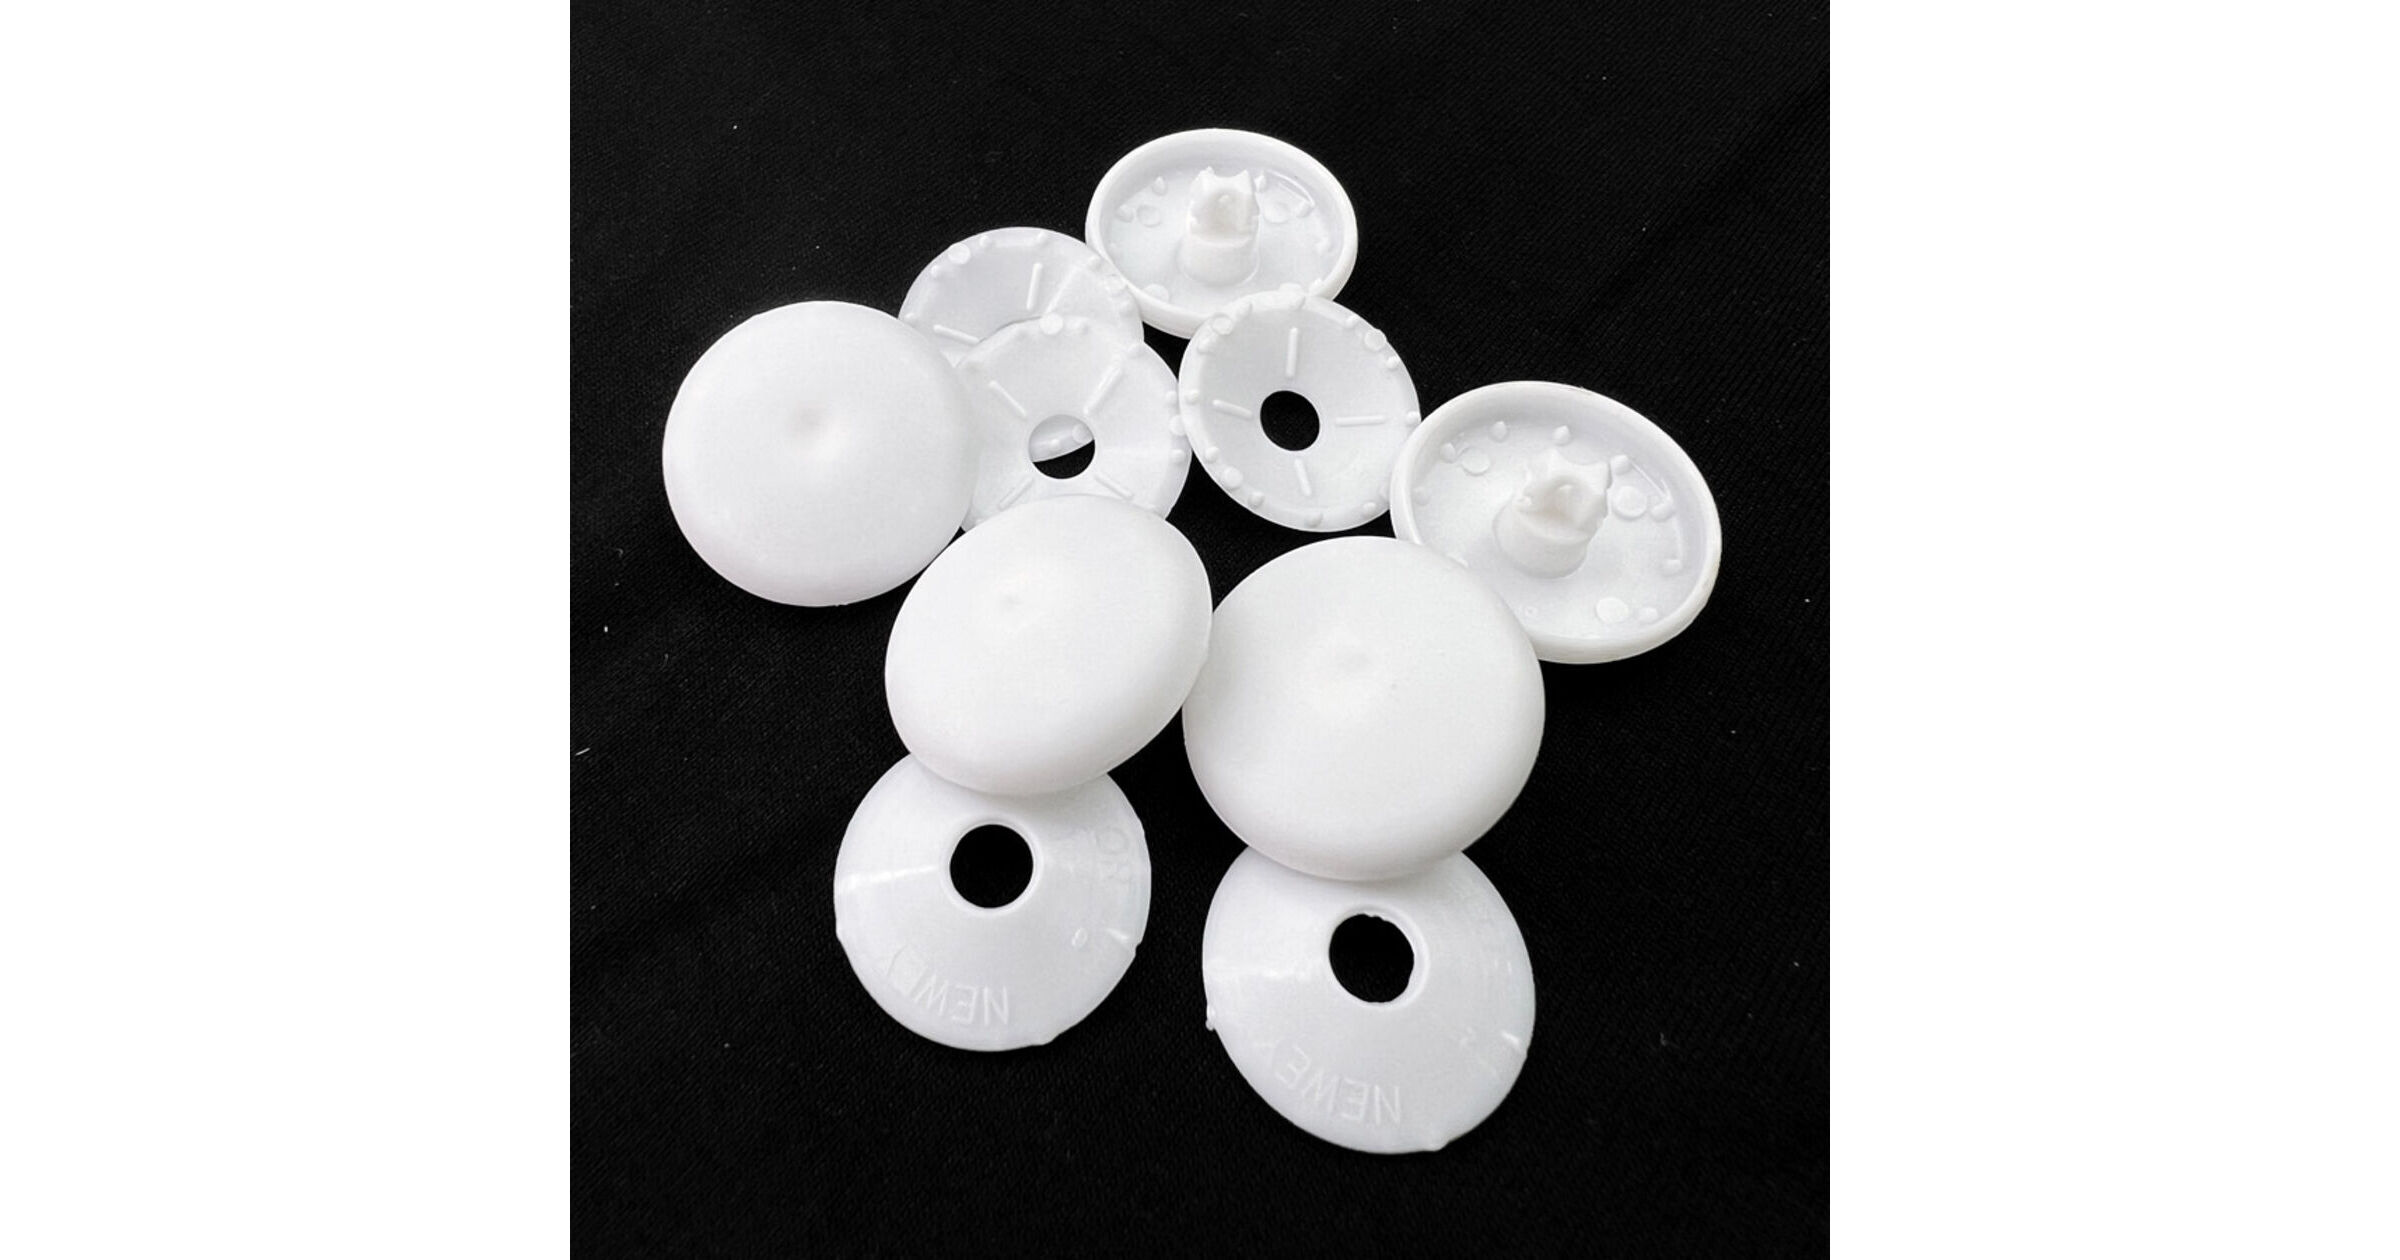 Hemline Self-Cover Buttons 22mm 5 Pack